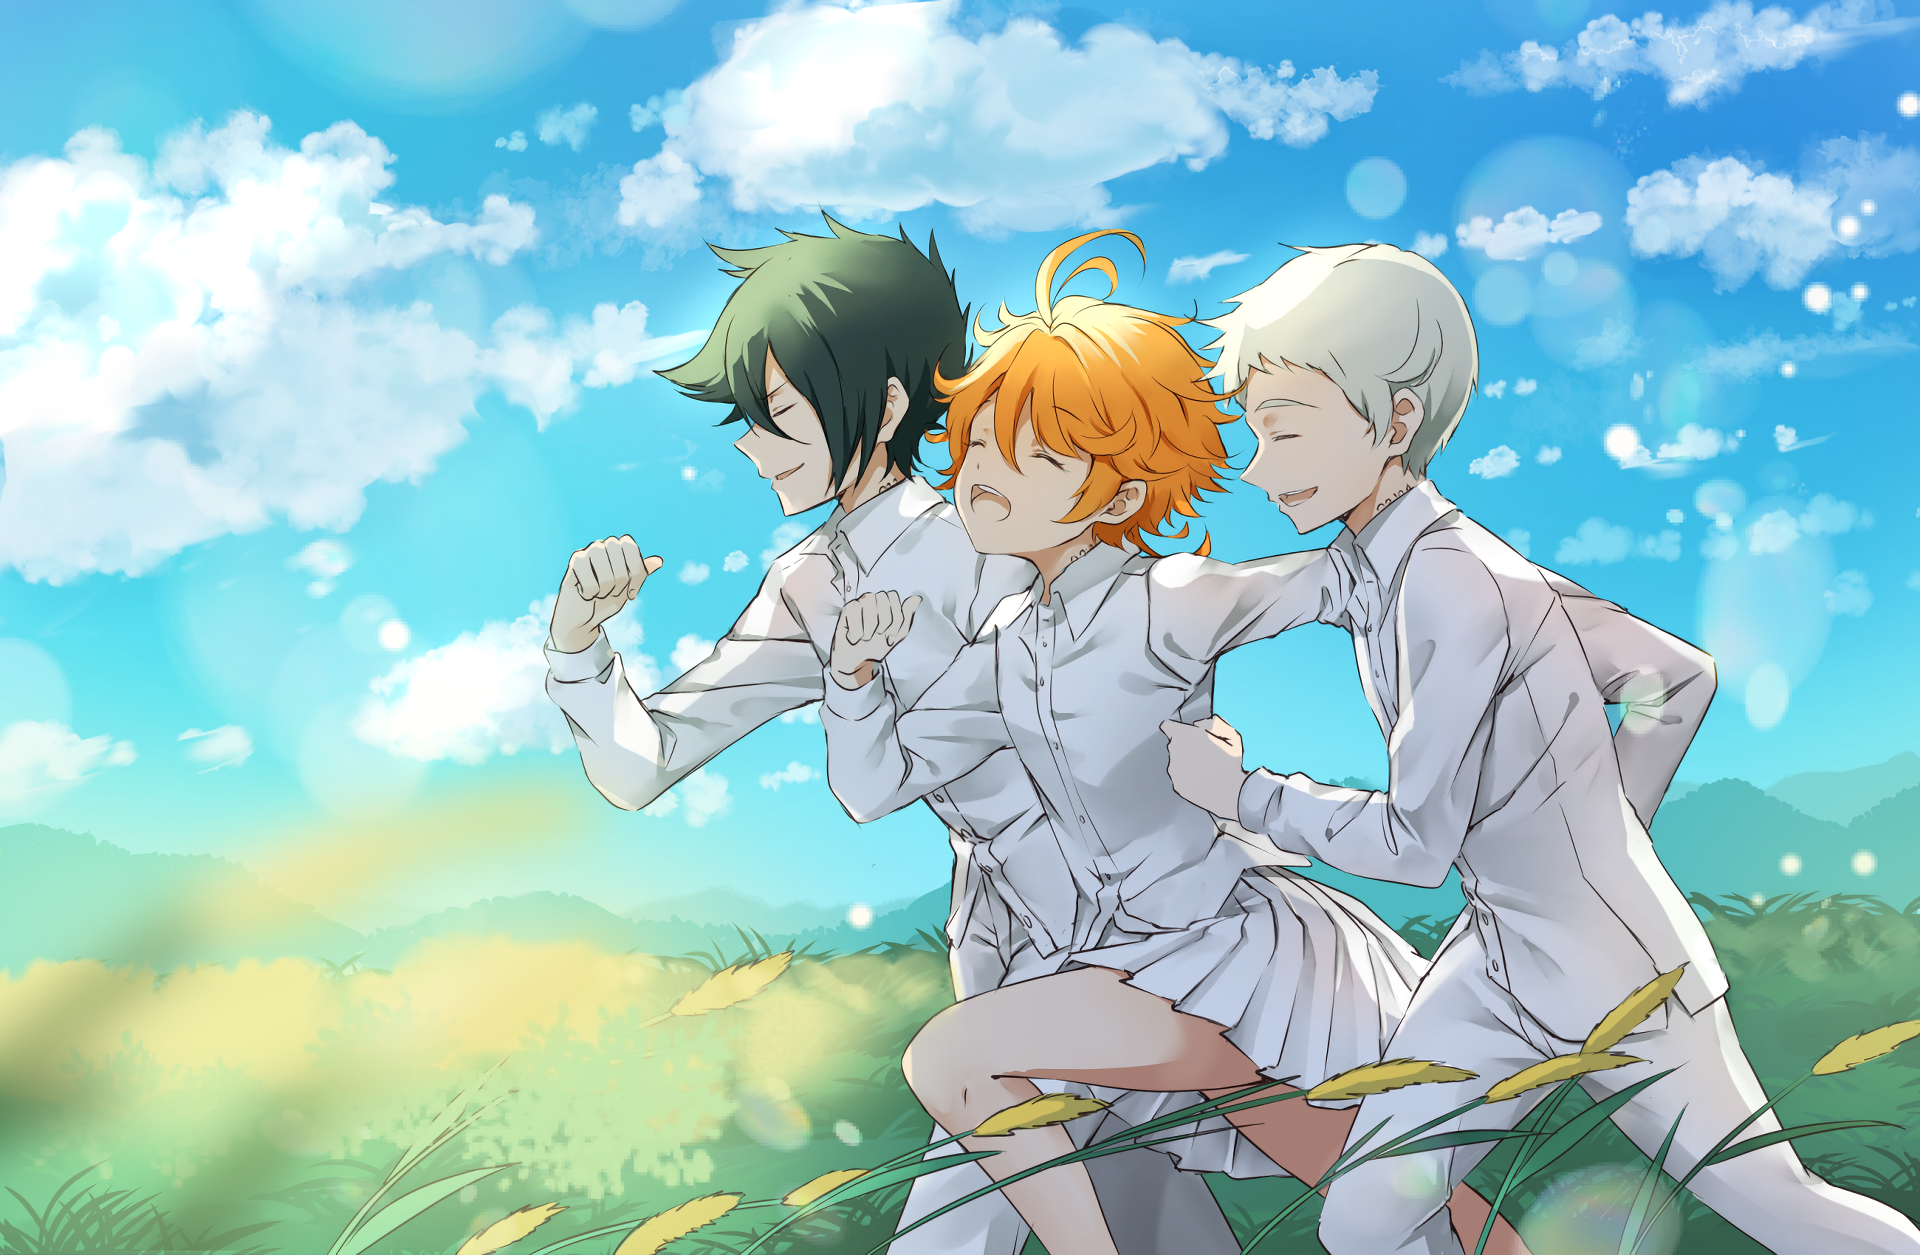 The Promised Neverland A Sub Gallery By: drak95